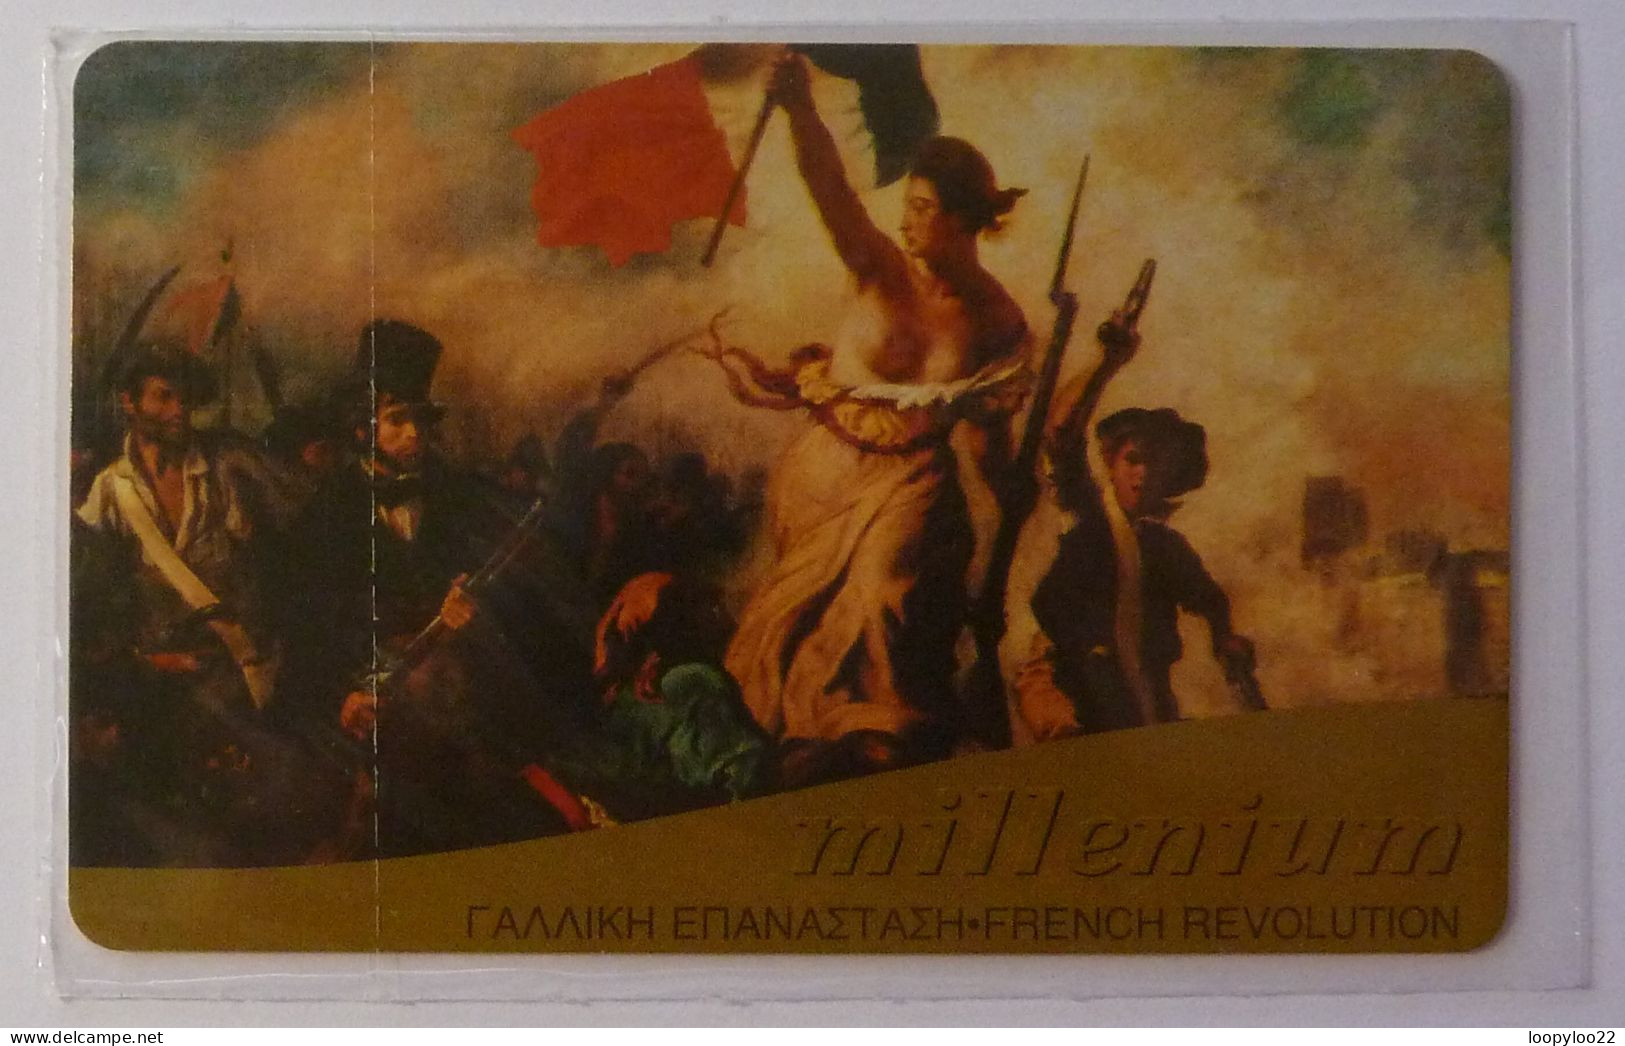 GREECE - Chip - OTE - Millenium - French Revolution - 11/99 - 1000 Units - Mint Blister - Greece